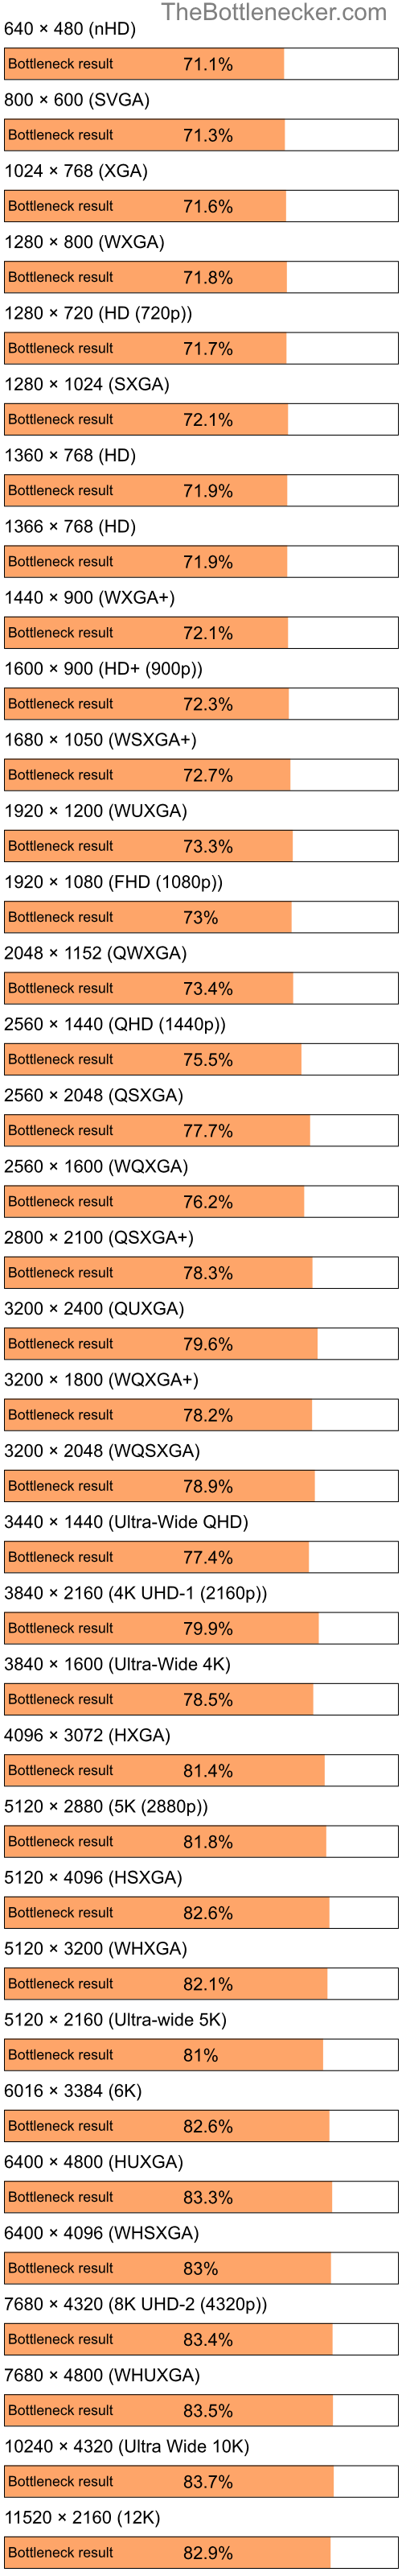 Bottleneck results by resolution for Intel Celeron M and NVIDIA GeForce 6200 A-LE in Processor Intense Tasks